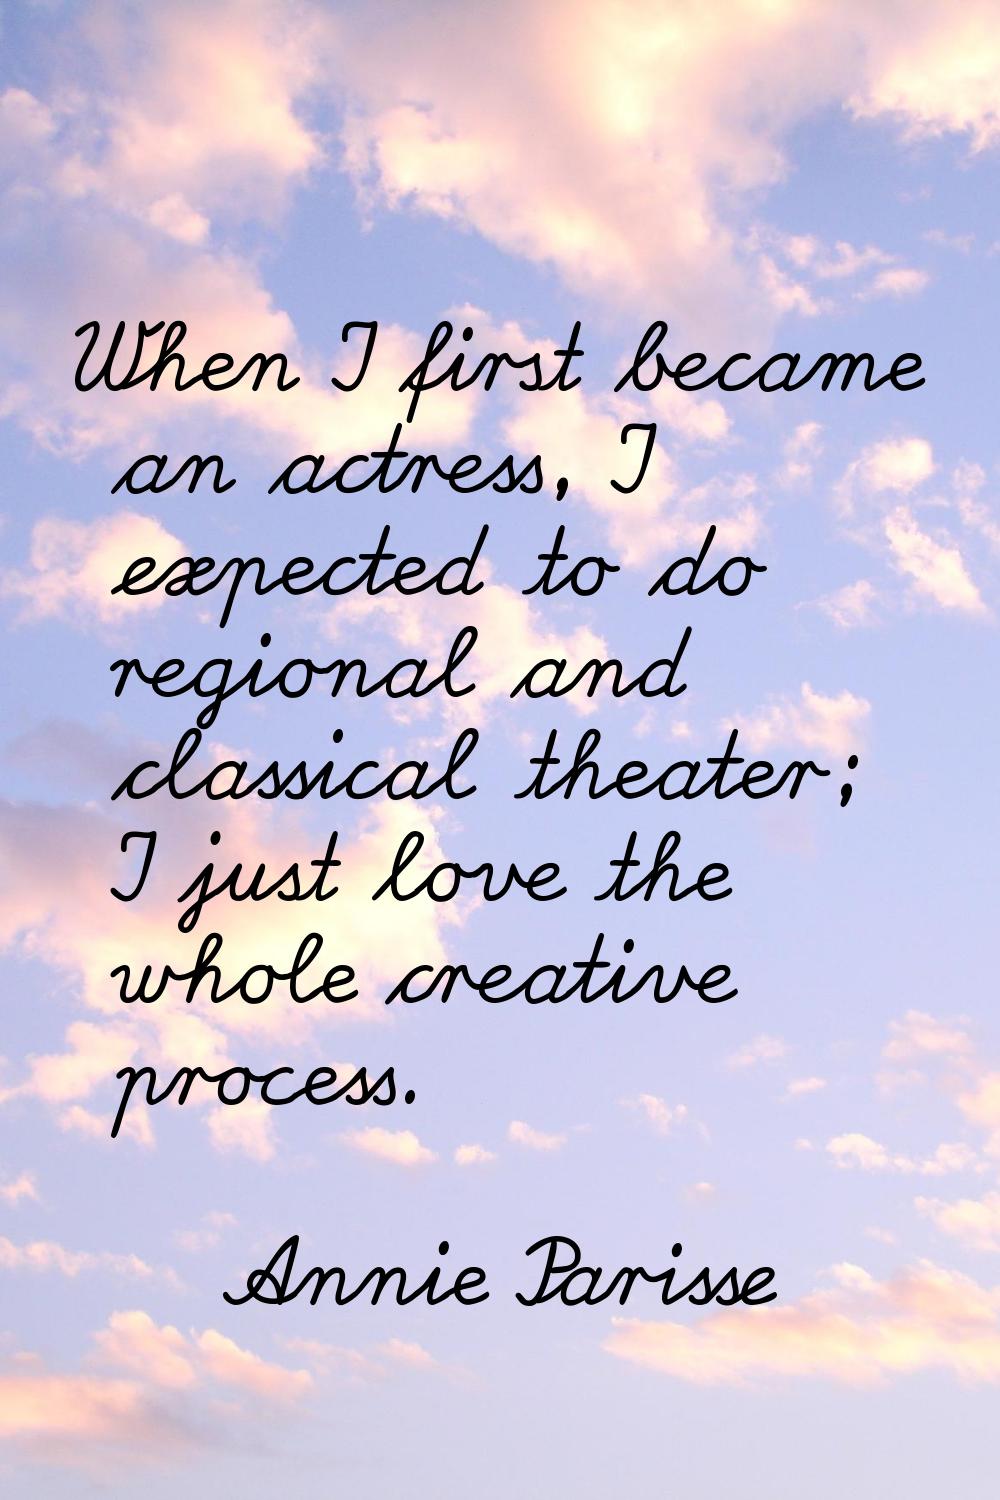 When I first became an actress, I expected to do regional and classical theater; I just love the wh